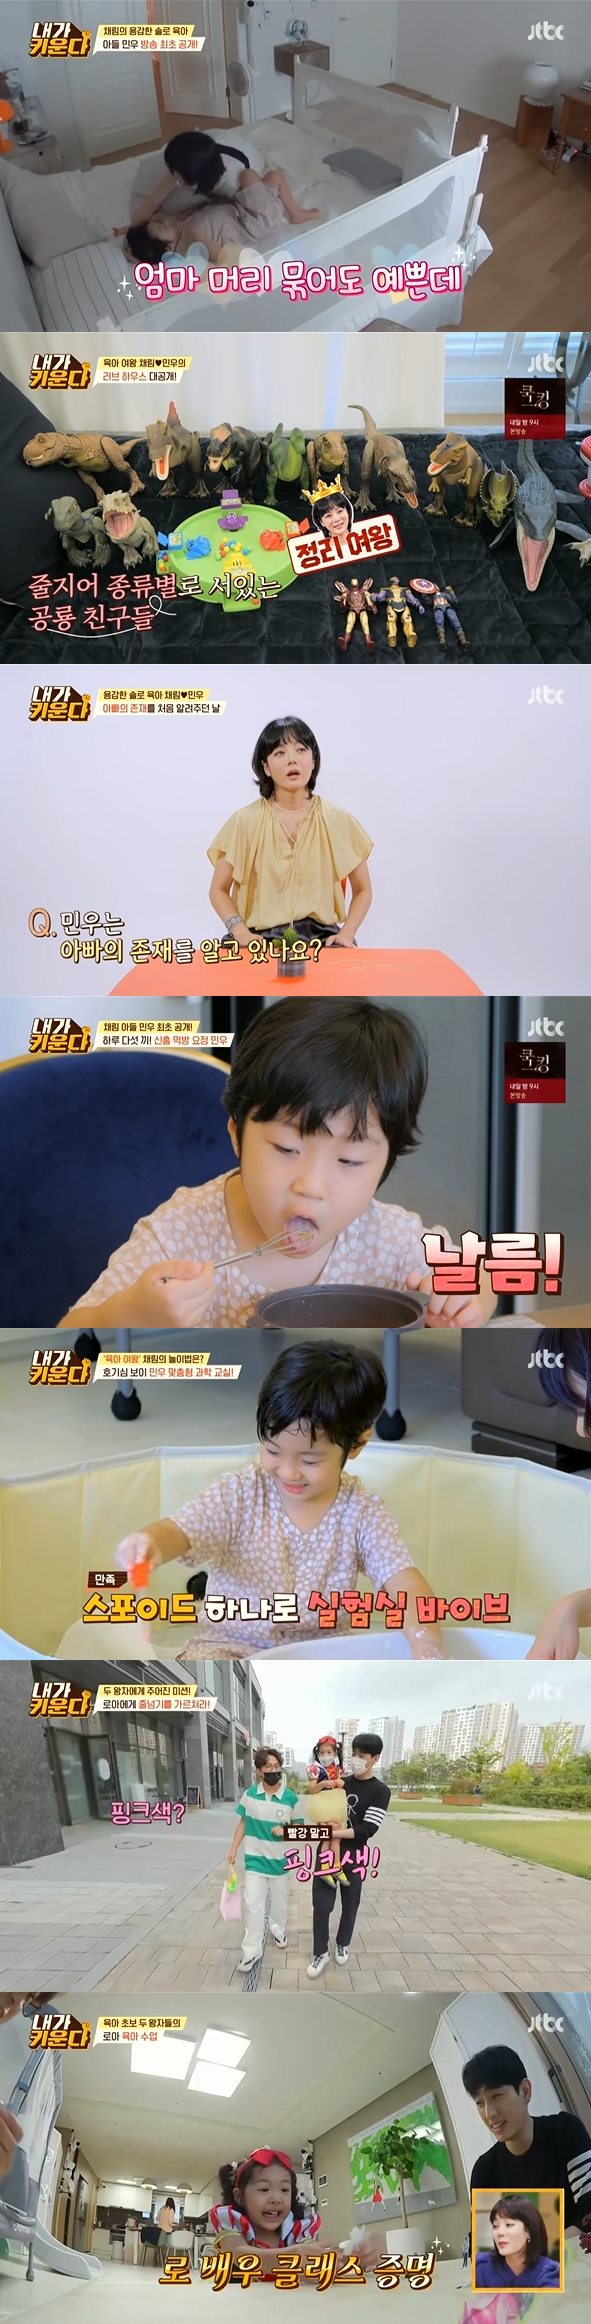 On the 29th, JTBC Brave Solo Parenting - I Raise, Actor Chae Rim first unveiled son Minwoo on the air.Chae Rim is a single mother who has been raising son Minwoo alone after divorce from ex-husband Jiame Gao; he talks about son, saying, I was fearless and there was nothing scary about it.Ive had so many fears since I had a baby. Its not not if I dont. It was really awesome.Son Min-woo, who was released to the public, was born as a good-looking child and was still bigger than his peers. Chae Rim said, It was always big from the stomach.It was a child who went out of the graph when he examined infants and young children. He ate five meals a day.How does a child from my stomach have so much charm that I want to have so much charm? There were things for minwoo in the house, trampolines, rented bumper cars, basketball goalposts, and three refrigerators for the well-eating son Minwoo.In the play room, Minwoos favorite things were arranged and attracted attention.There was a gift that Minwoo had prepared before she was born. A letter with Fathers heart.The production team asked if Son Minwoo knew about Fathers existence. Chae Rim said, I was five years old and explained.I did not say Why does not my house look like Father because I was born in December, but I always felt it at the end of my gaze.When I went outside, I looked at the children with Father. I felt that gaze. So I said, Do you want to see Father?I asked him, No. At first, he said, Minwoo does not have Father. He has Father.Because there is no Father in Minwoos memory, it was when he was too young. Minwoo also has Father, but he cant come to see it now. So he showed me the picture.I kept watching without saying, but I do not look at the Family with Father after that. Chae Rim started cooking for minwoo in the morning, while Minwoo attracted attention by eating eggs for steamed eggs secretly from his mother and eating fish and pickles well.Chae Rims extraordinary Parenting Act has also been unveiled.Jo Yoon-hee, meanwhile, met with Park Sung-Kwang and Yoon Park.Park Sung-Kwang and Yoon Park spent time playing with Jo Yoon-hees daughter Roar, and Roar was saddened by tears at his mothers words that his uncles were leaving.Photo = JTBC Broadcasting Screen